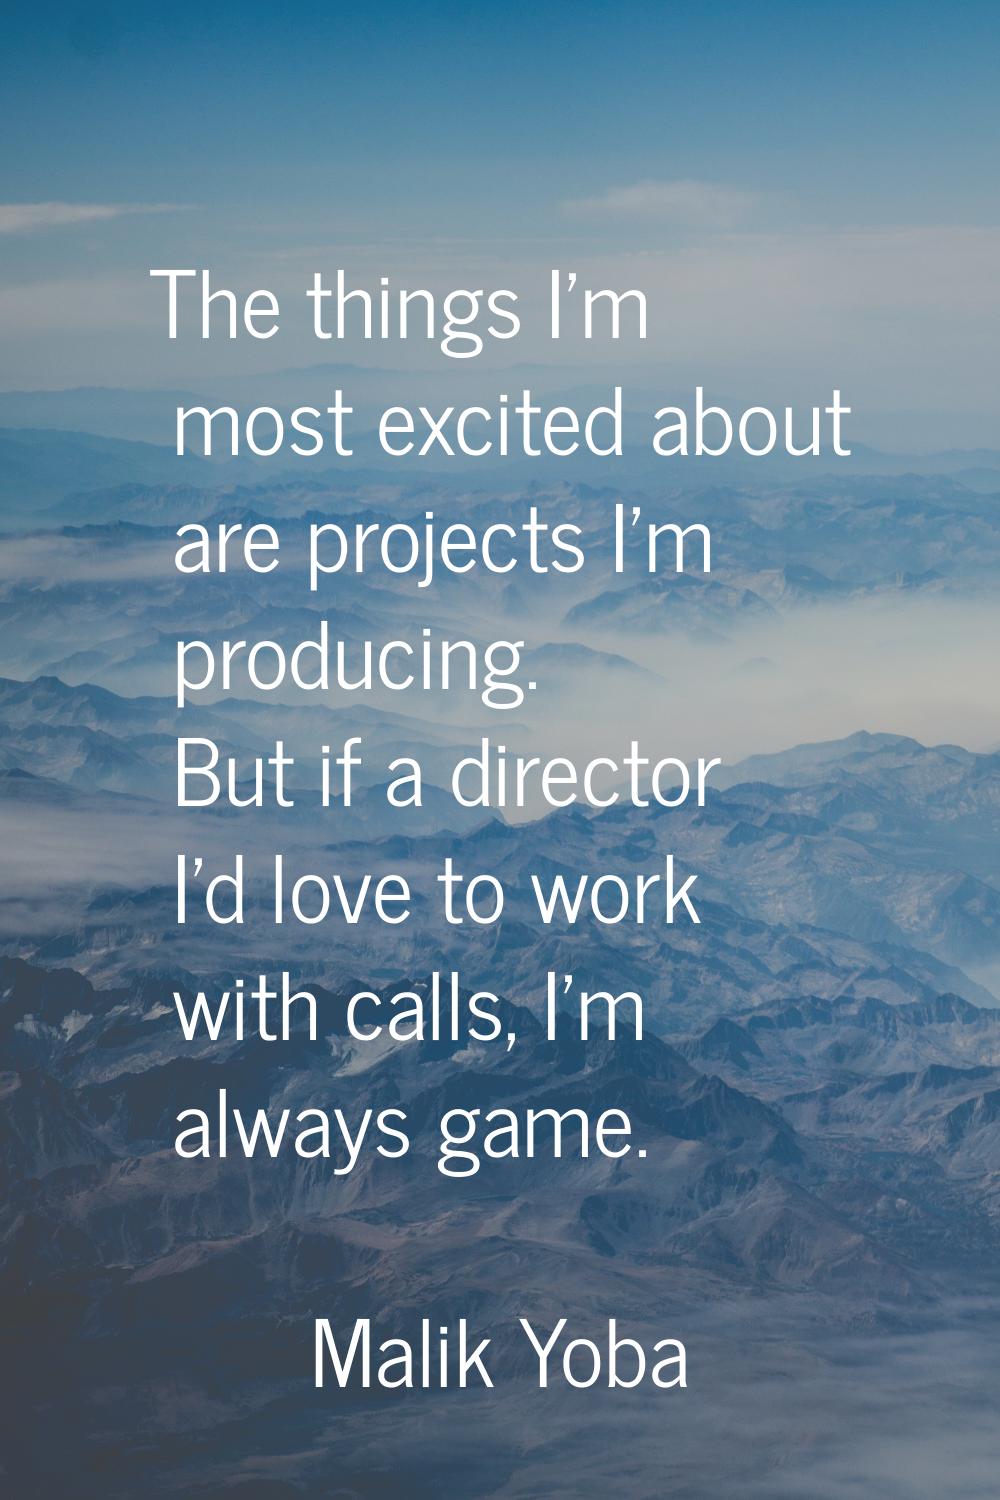 The things I'm most excited about are projects I'm producing. But if a director I'd love to work wi